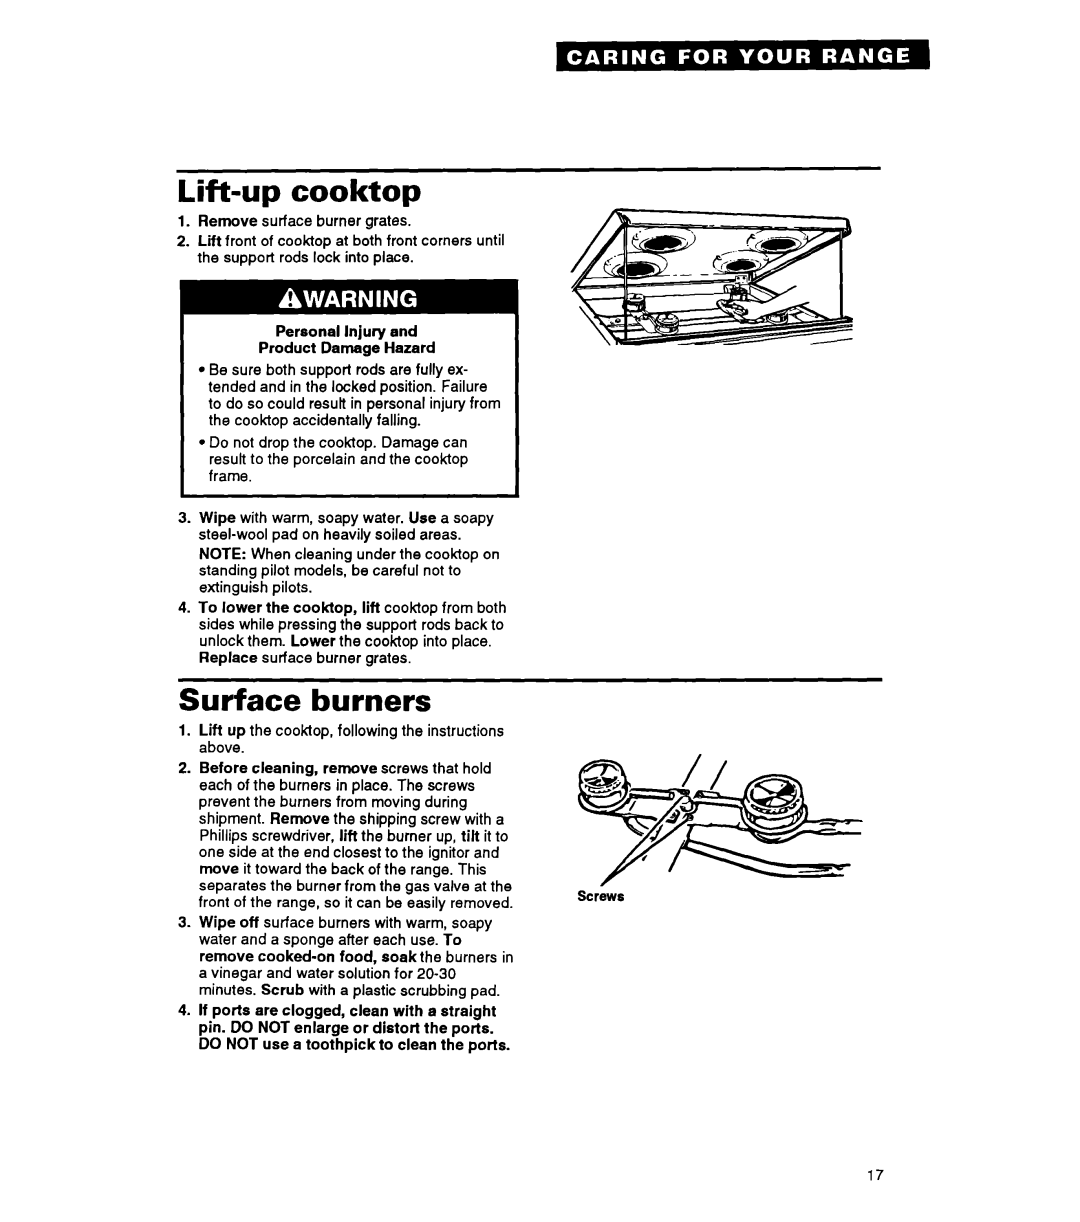 Whirlpool FGP325A manual Lift-upcooktop, Surface burners, Personal Injury and Product Damage Hazard 